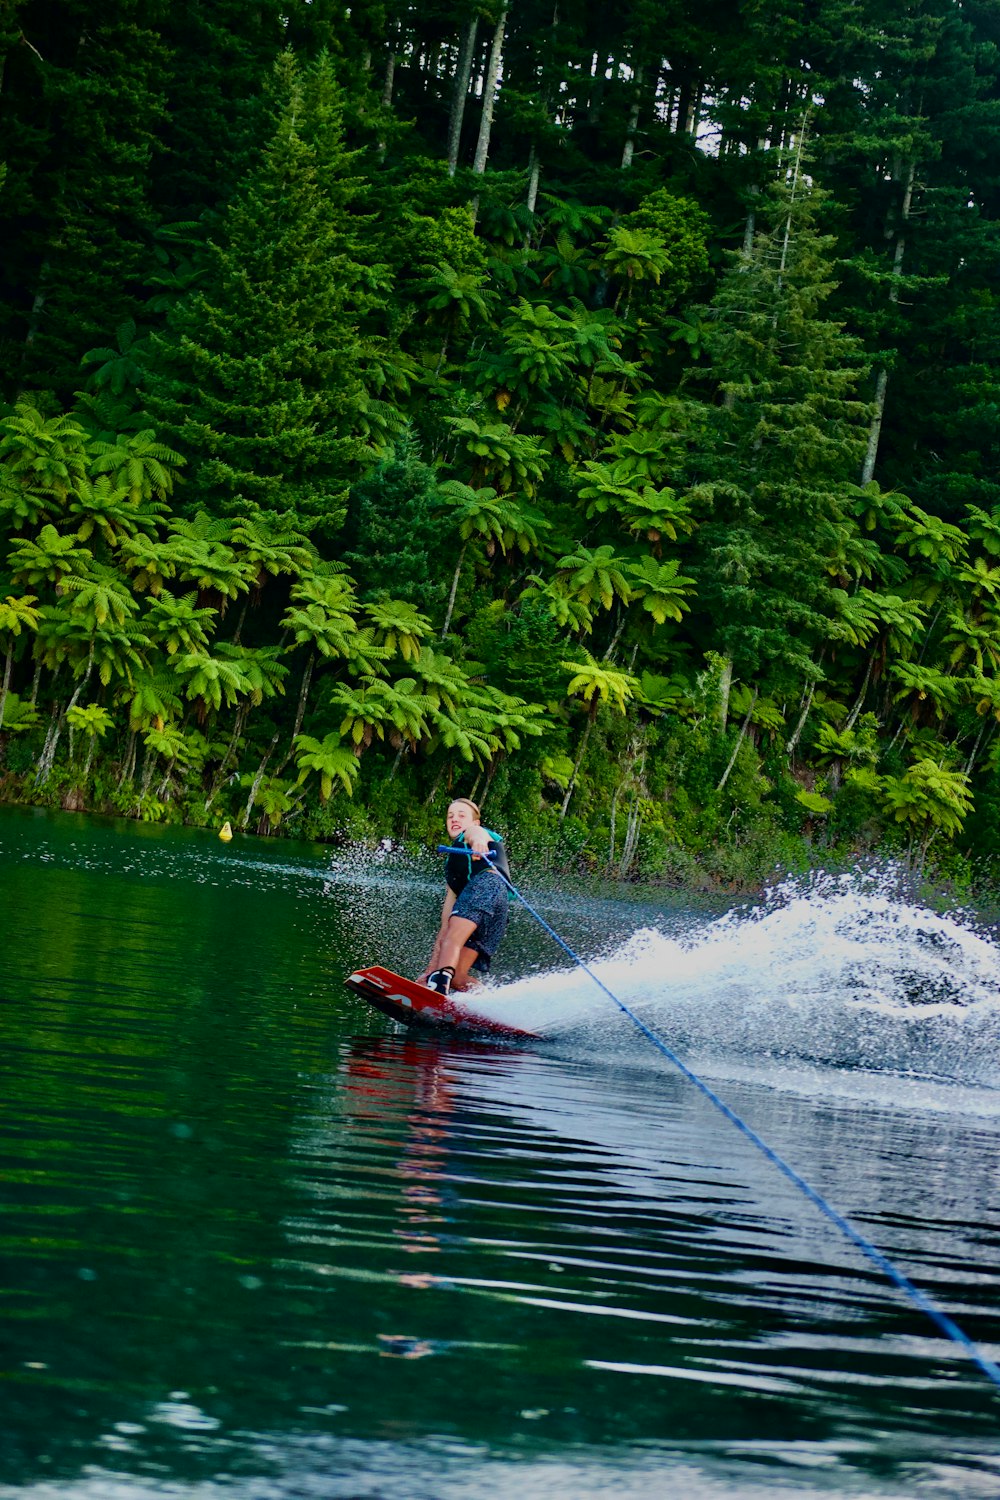 a person on a water ski being pulled by a boat